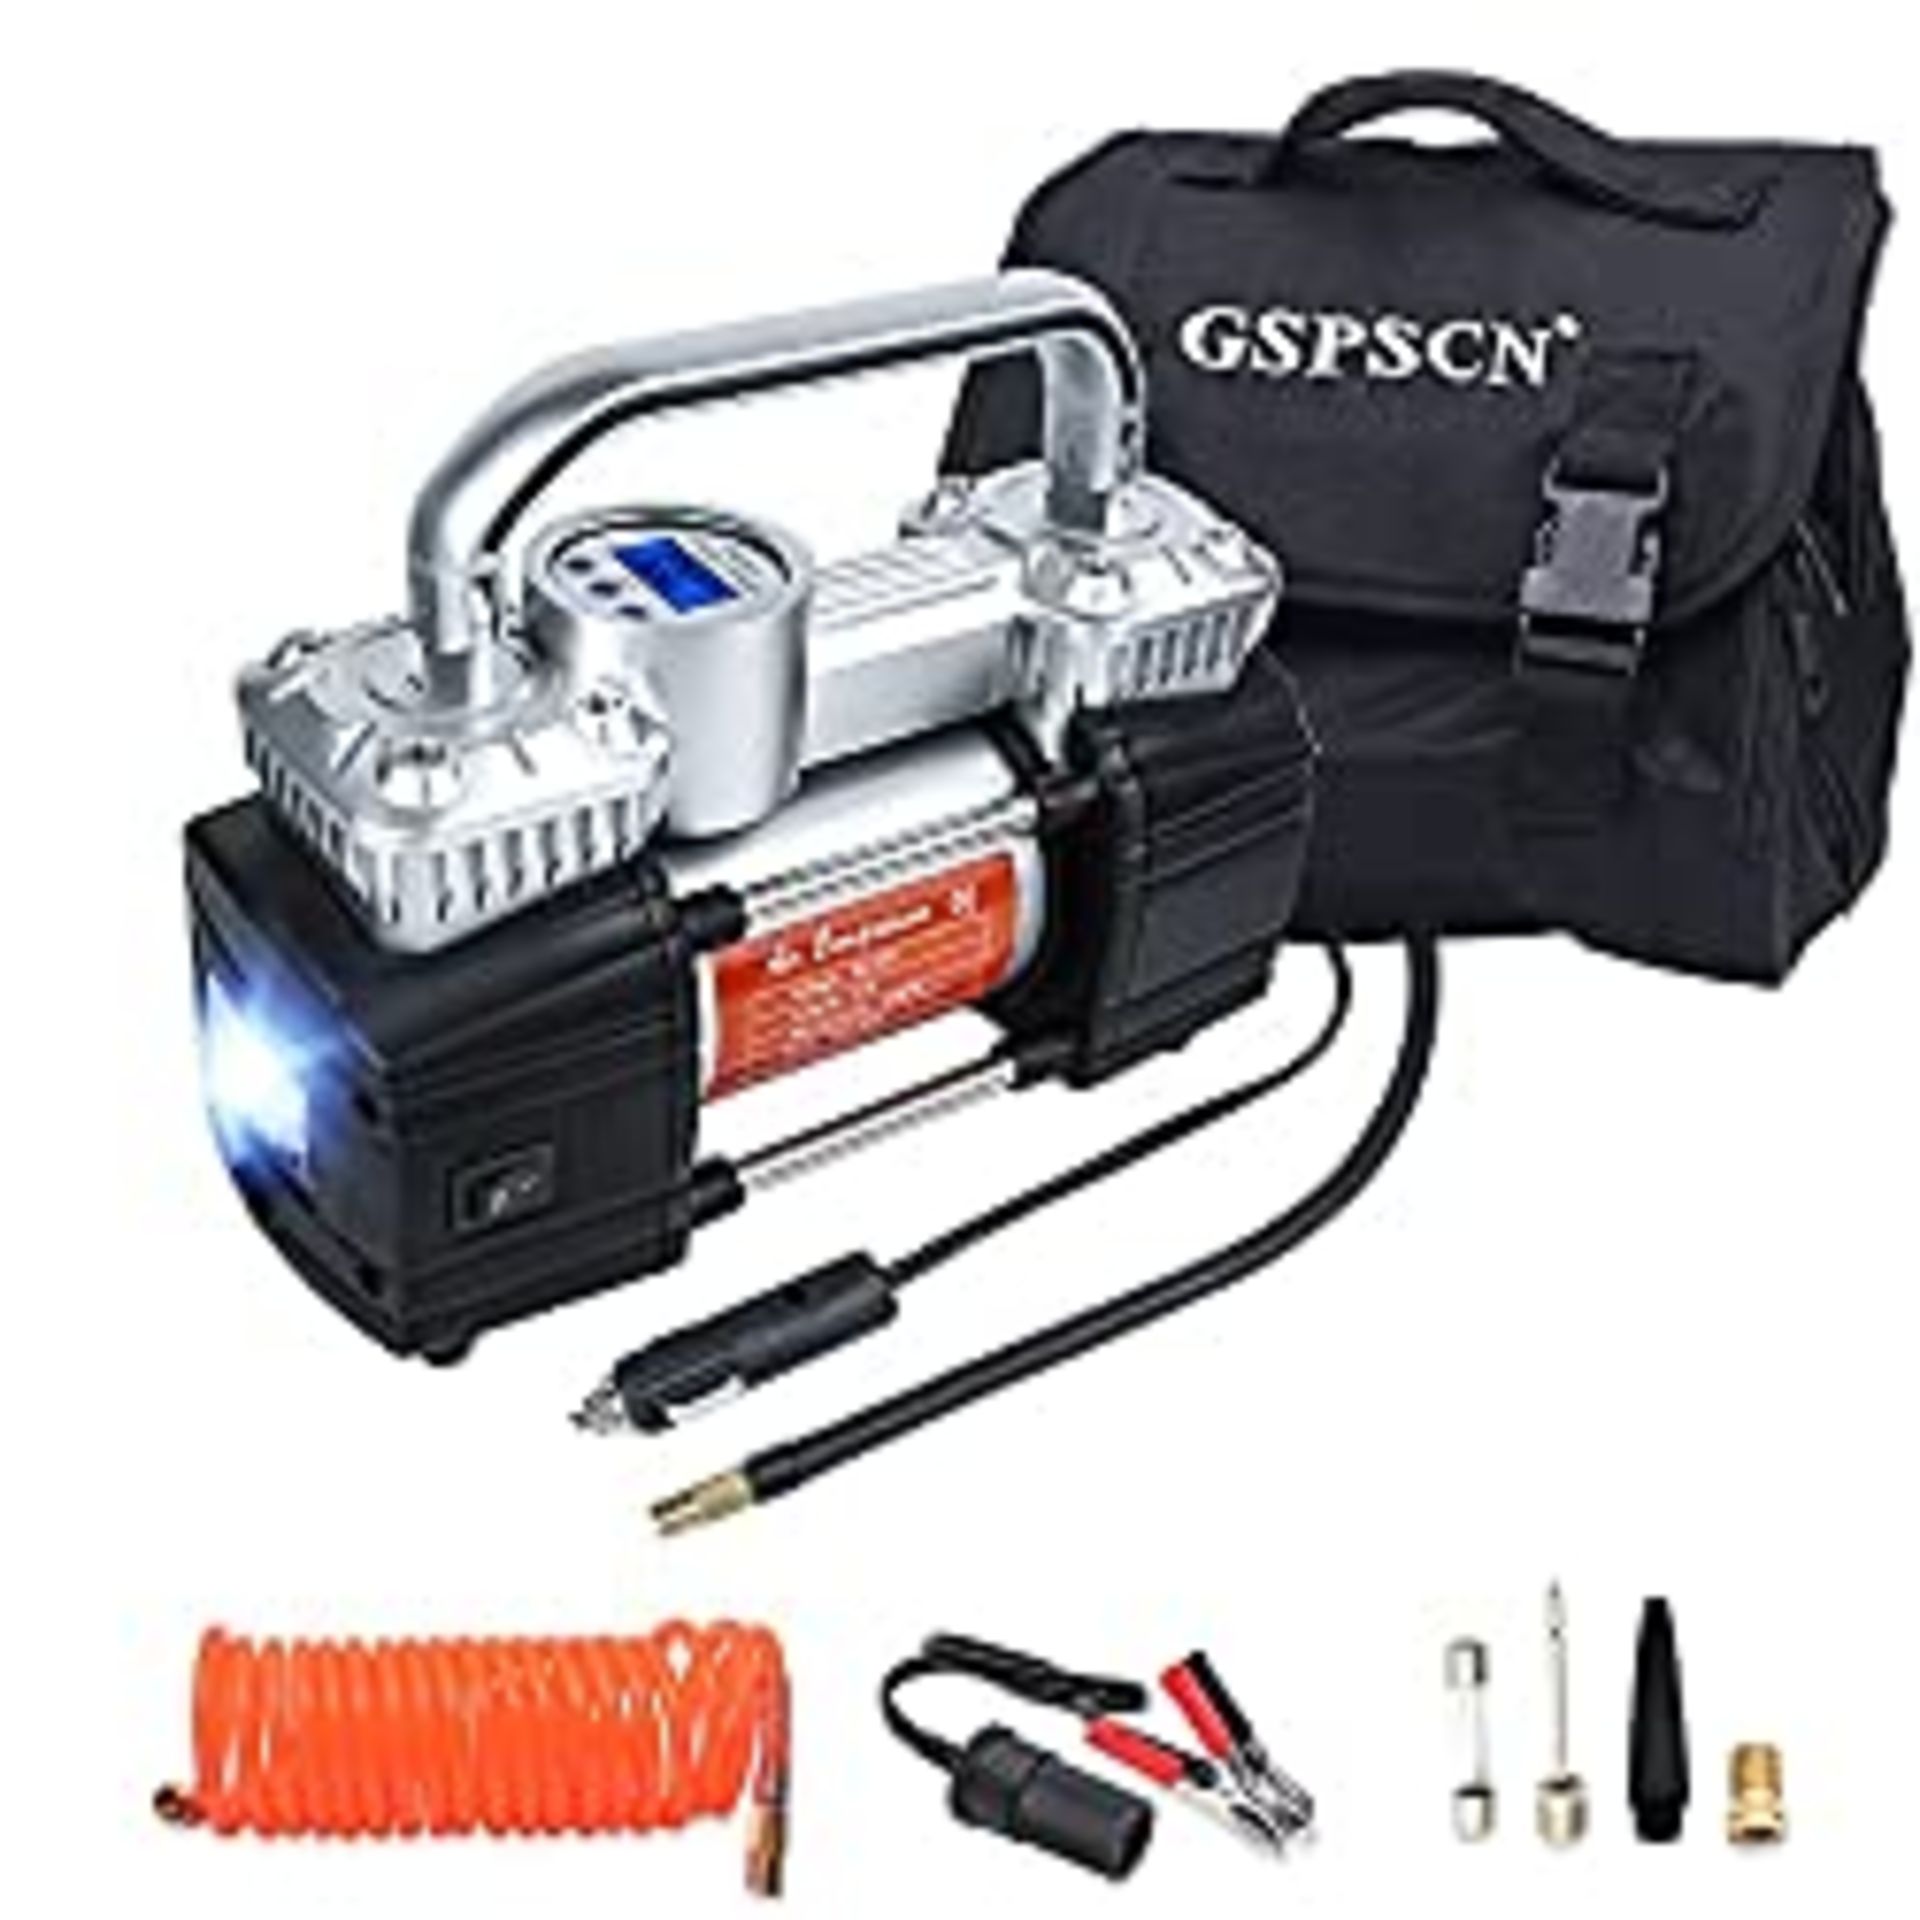 RRP £49.99 GSPSCN Portable Digital Car Tyre Inflator with Gauge 150Psi Auto Shut-Off